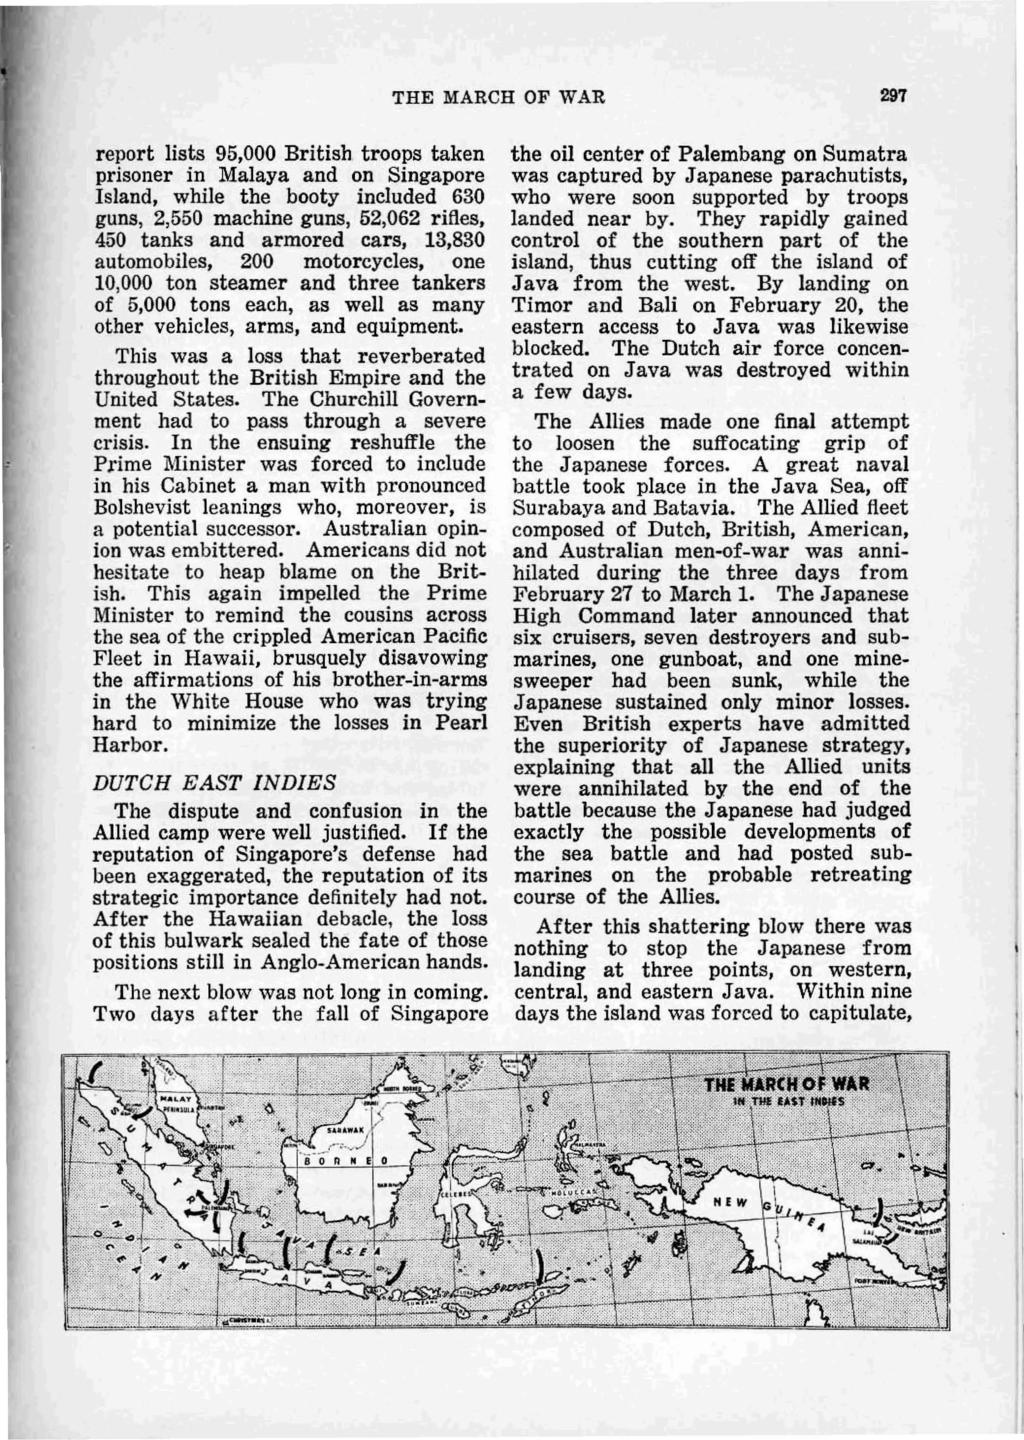 THE MARCH OF WAR 297 report lists 95,000 British troops taken prisoner in Malaya and on Singapore Island, while the booty included 630 guns, 2,550 machine guns, 52,062 rifles, 450 tanks and armored